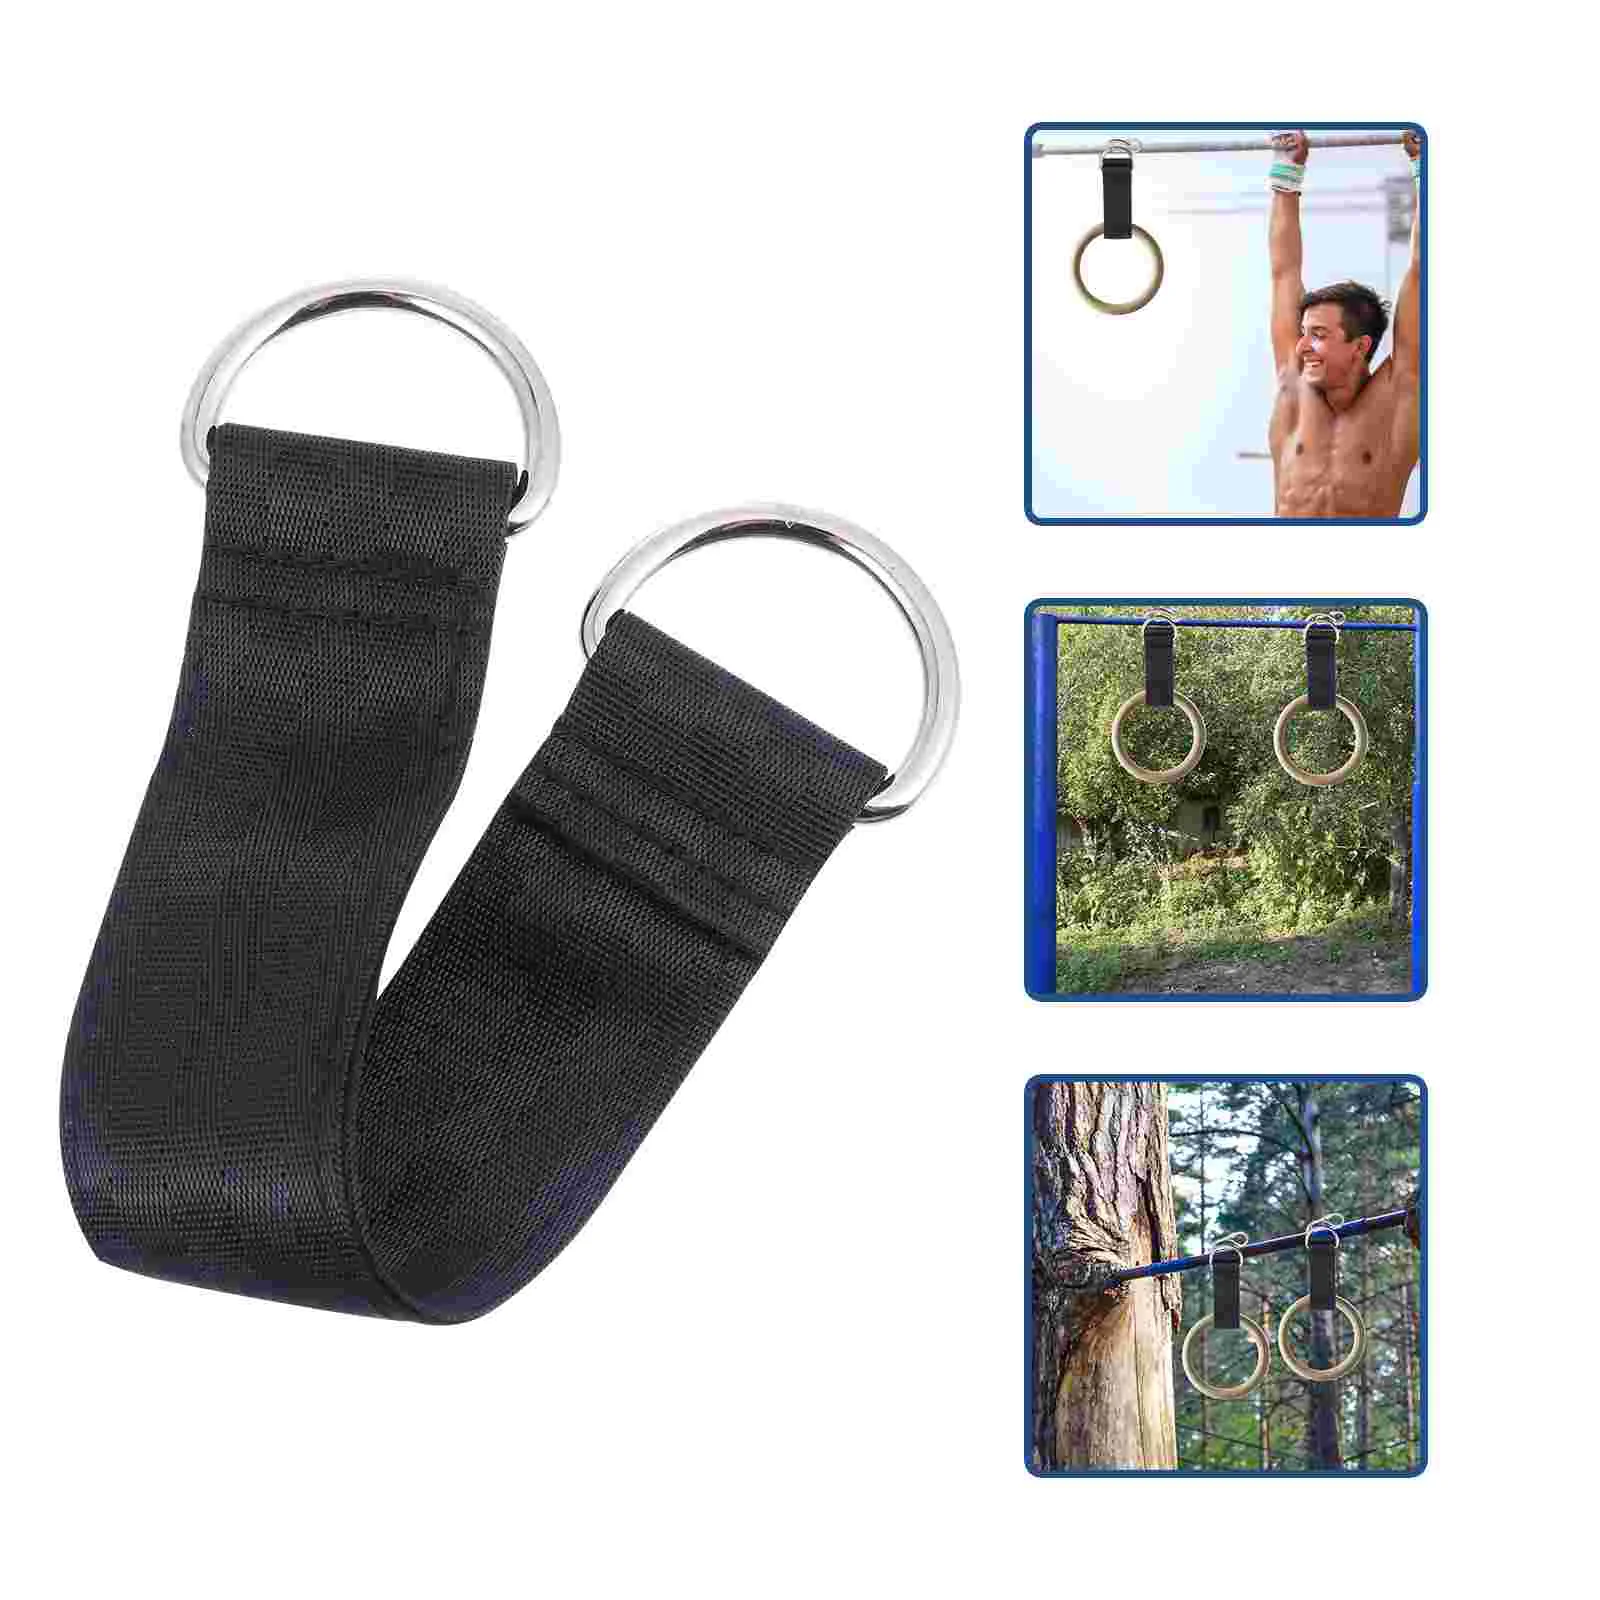 

Straps Hanging Strap Swing Fitness Belts Ab Ring Gymnastic Bands Training Sling Pullup Exercise Core Treeup Bar Gym Indoor